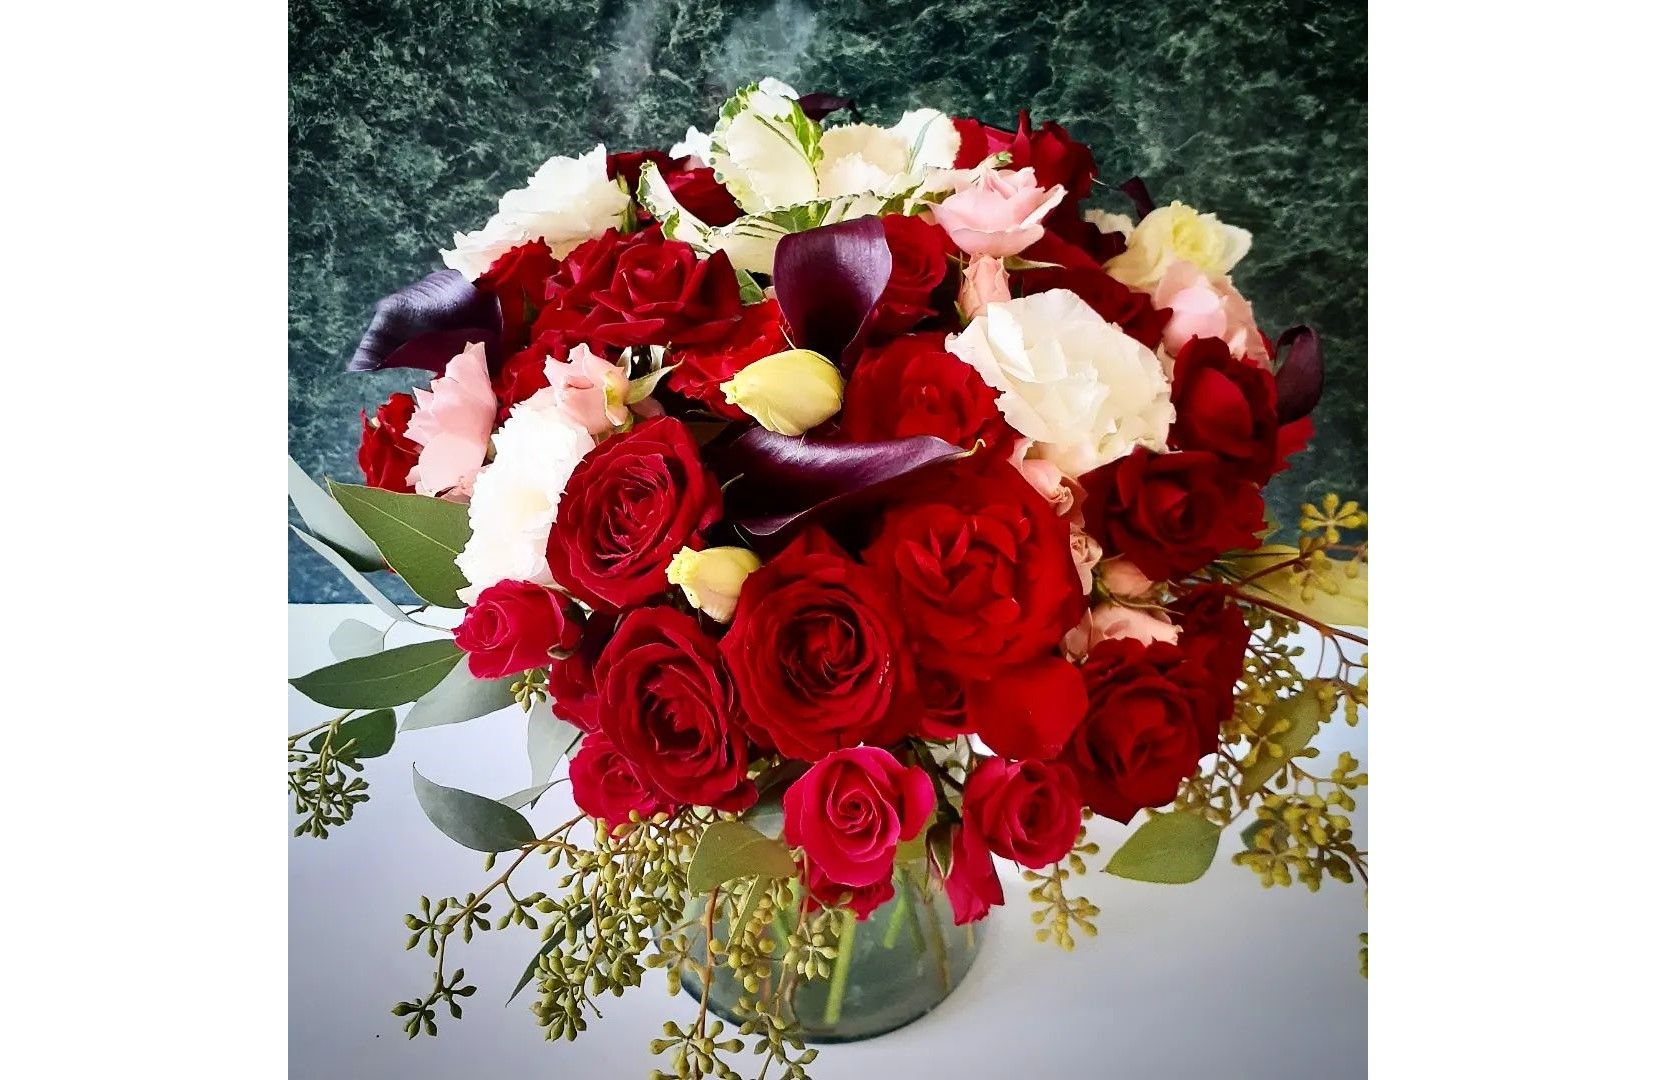 Making Great Days Spectacular! -West Hollywood Florist